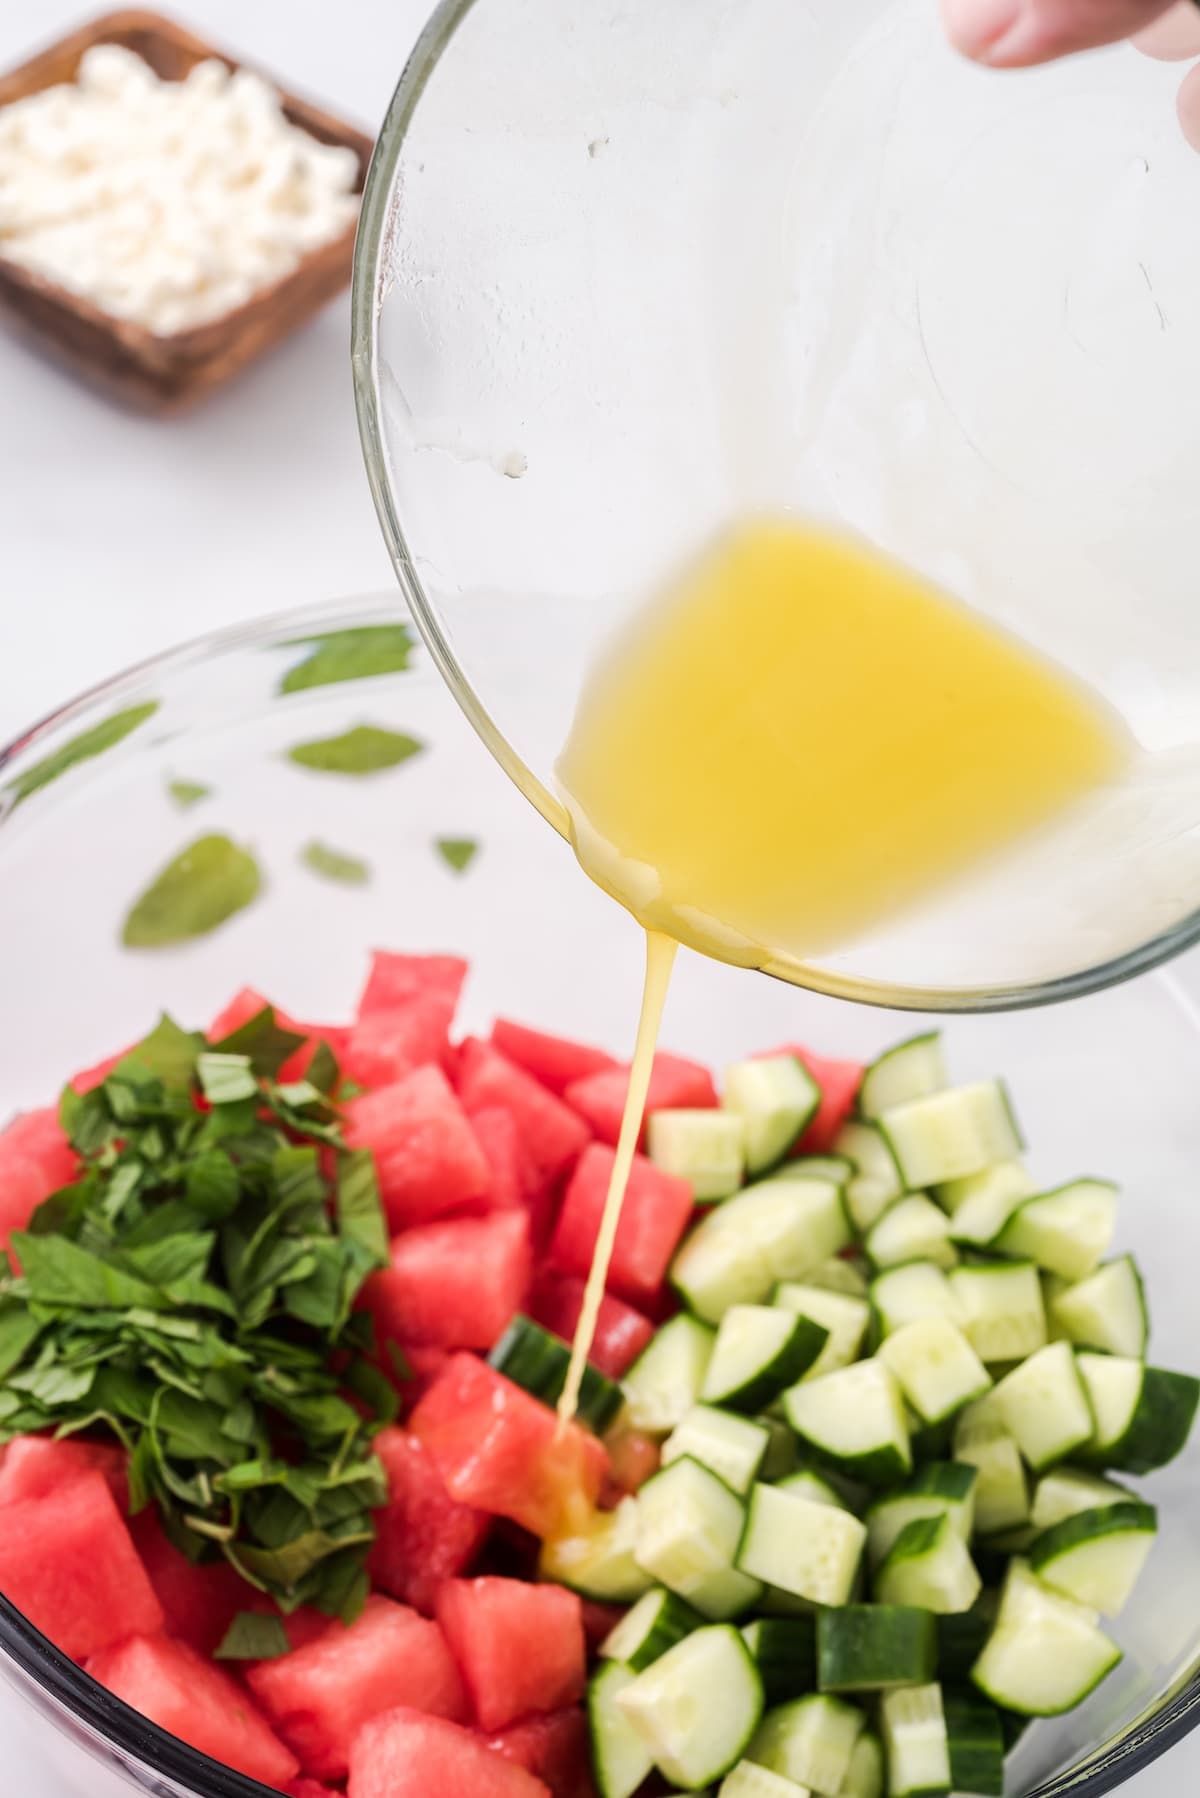 pour the dressing over the watermelon and cucumber